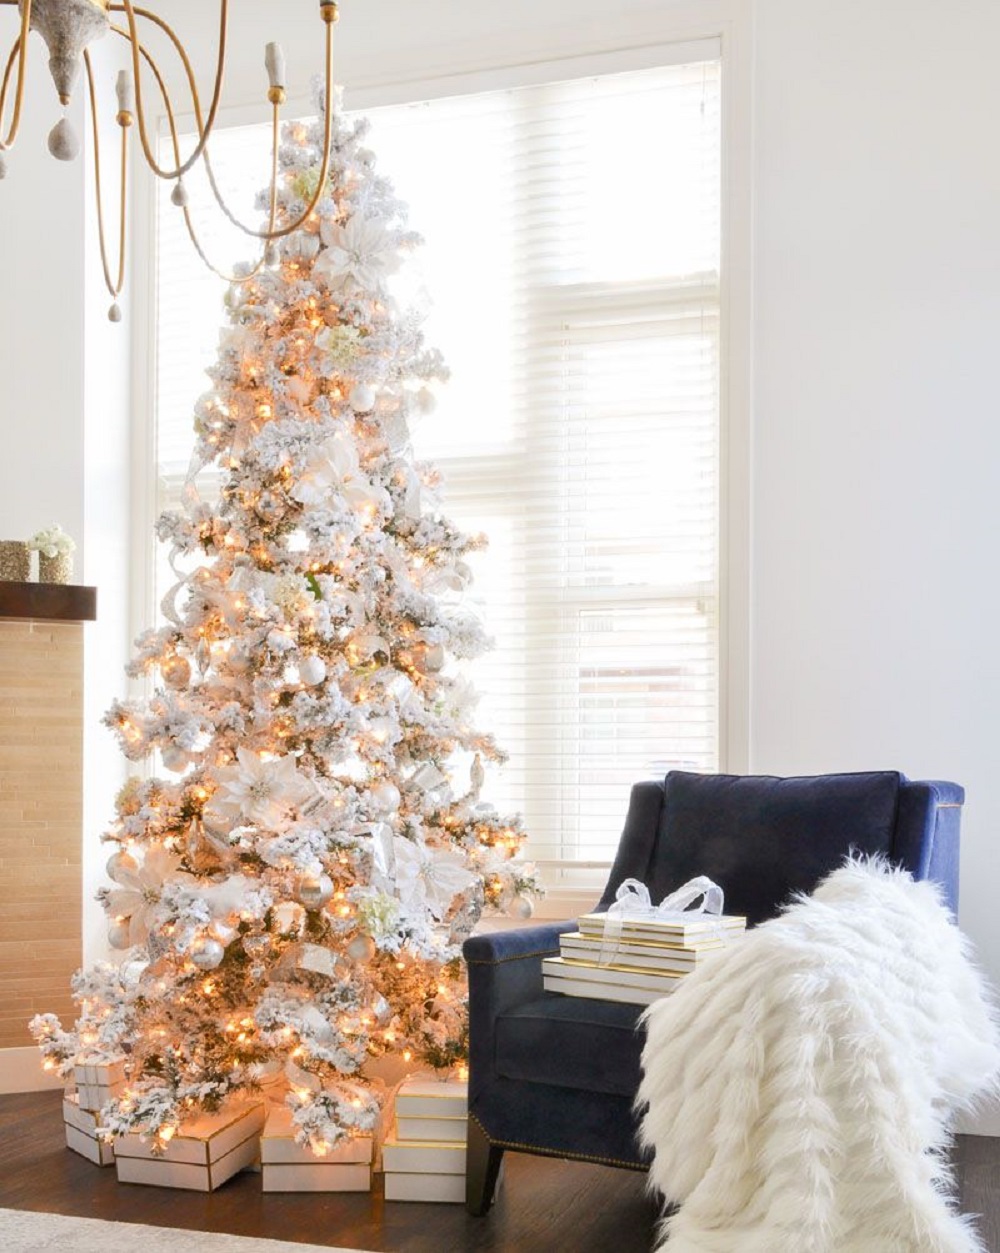 t3-150 Christmas living room decorations you must try in the holiday season